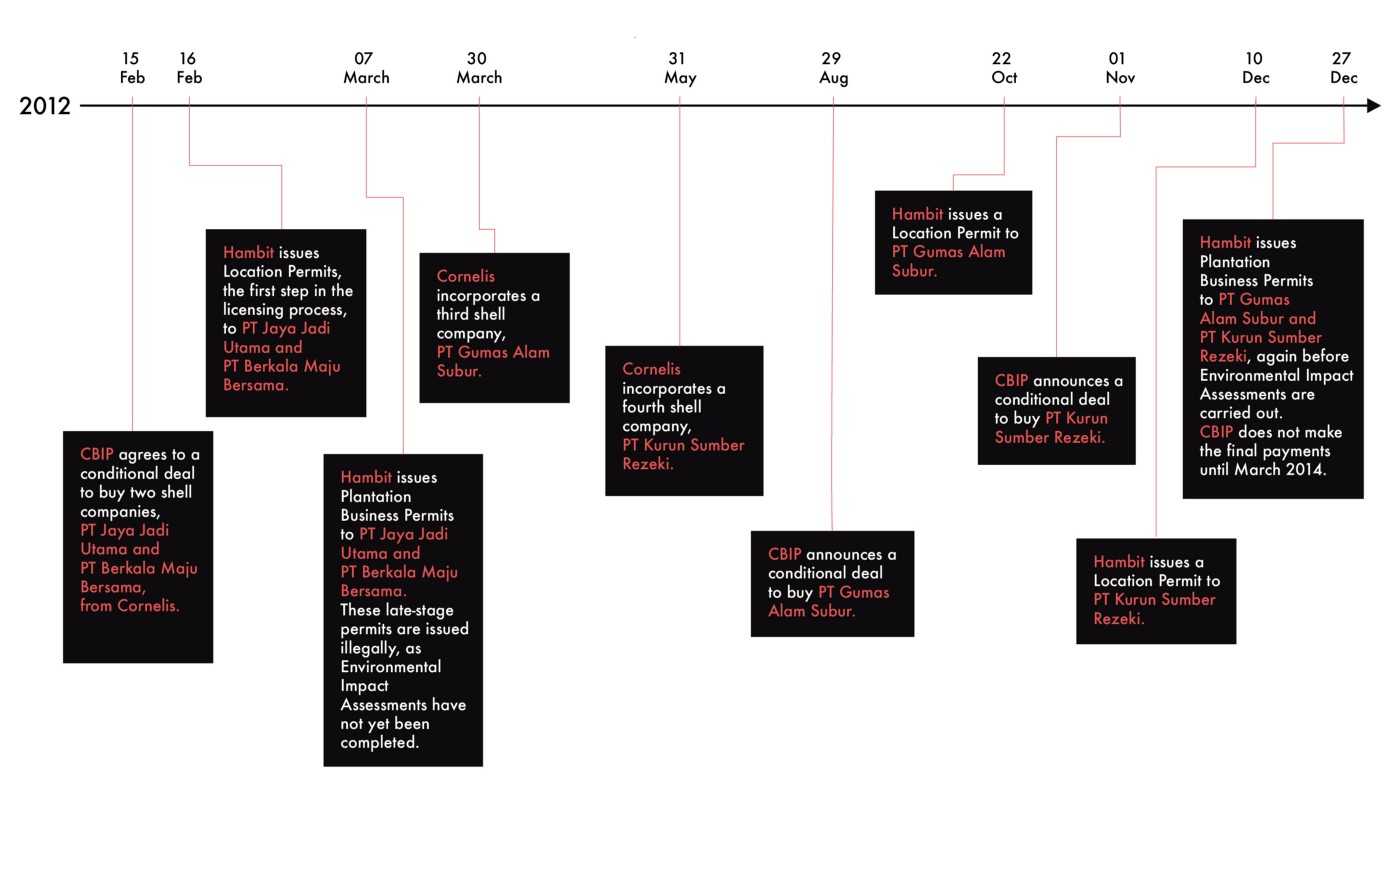 Timeline showing that over the course of nine months in 2012, Cornelis and his partners sold four shell companies to CBIP